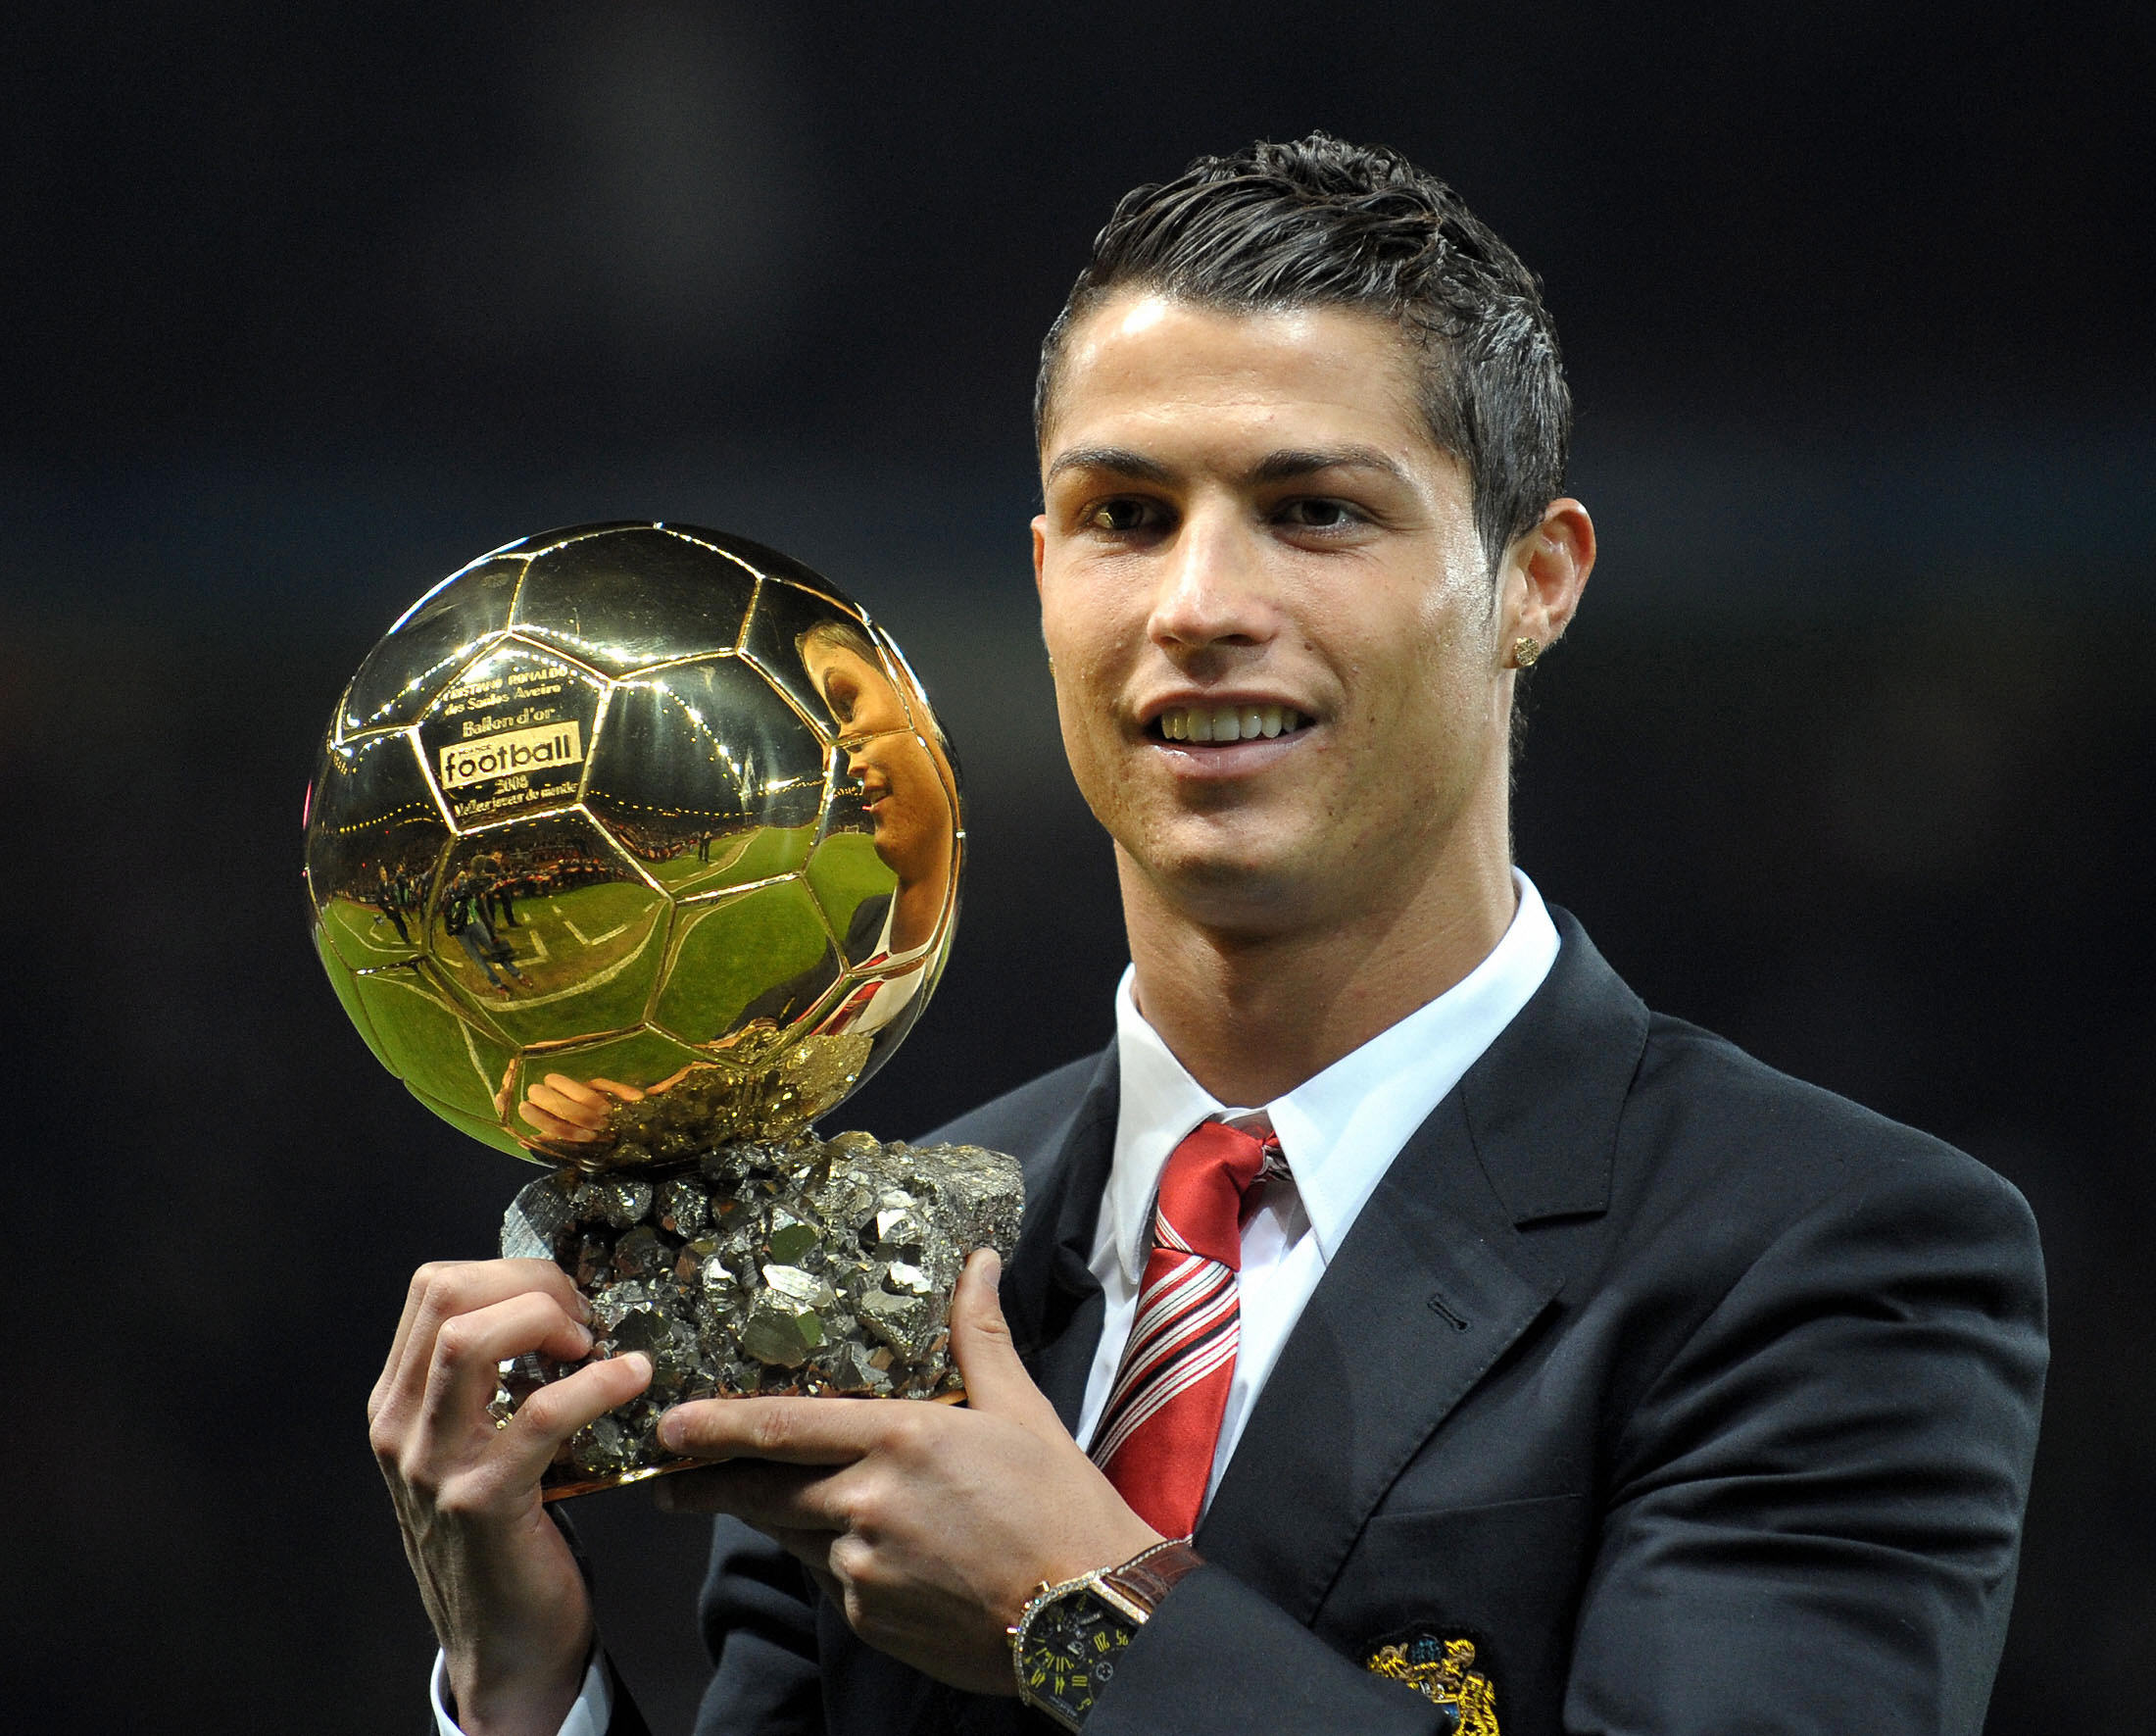 Cristiano Ronaldo believes it will be difficult for Manchester United to get back to the top.